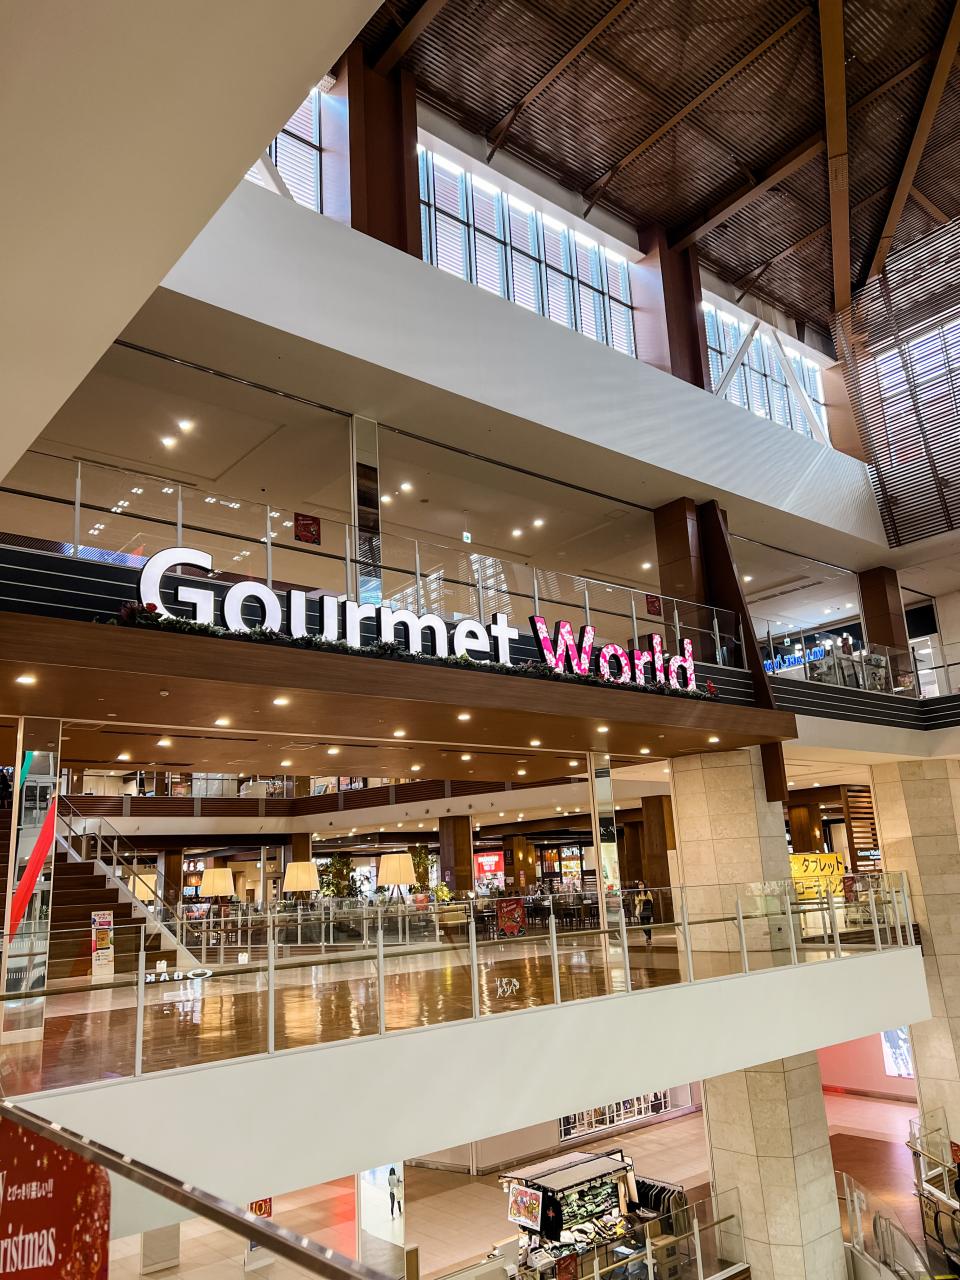 food court in japanese mall with gourmet world sign on top